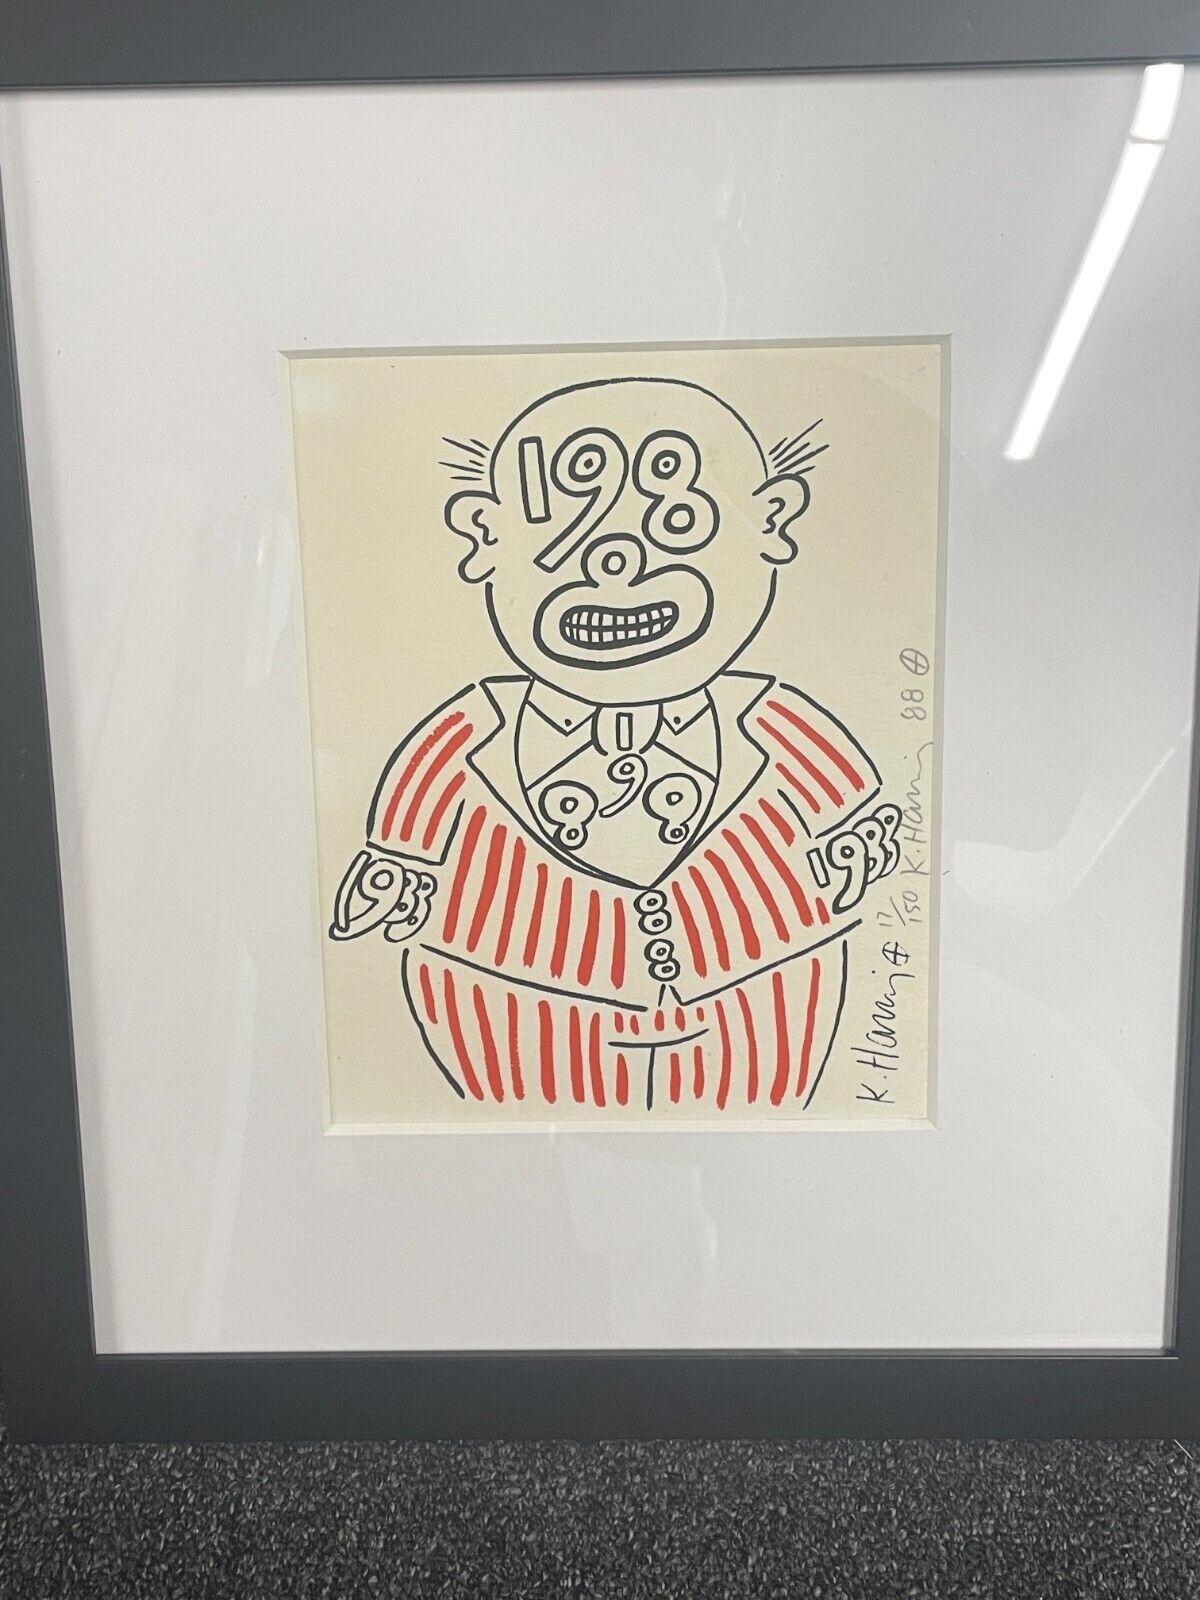 Artist: Keith Haring
Title: 1988 Man
Edition: Numbered from the edition of 150
Medium: Original screen-print in colors on wove paper
Publisher: Martin Lawrence Limited Editions
Year: 1988
Signature: Hand Signed numbered and dated by Keith